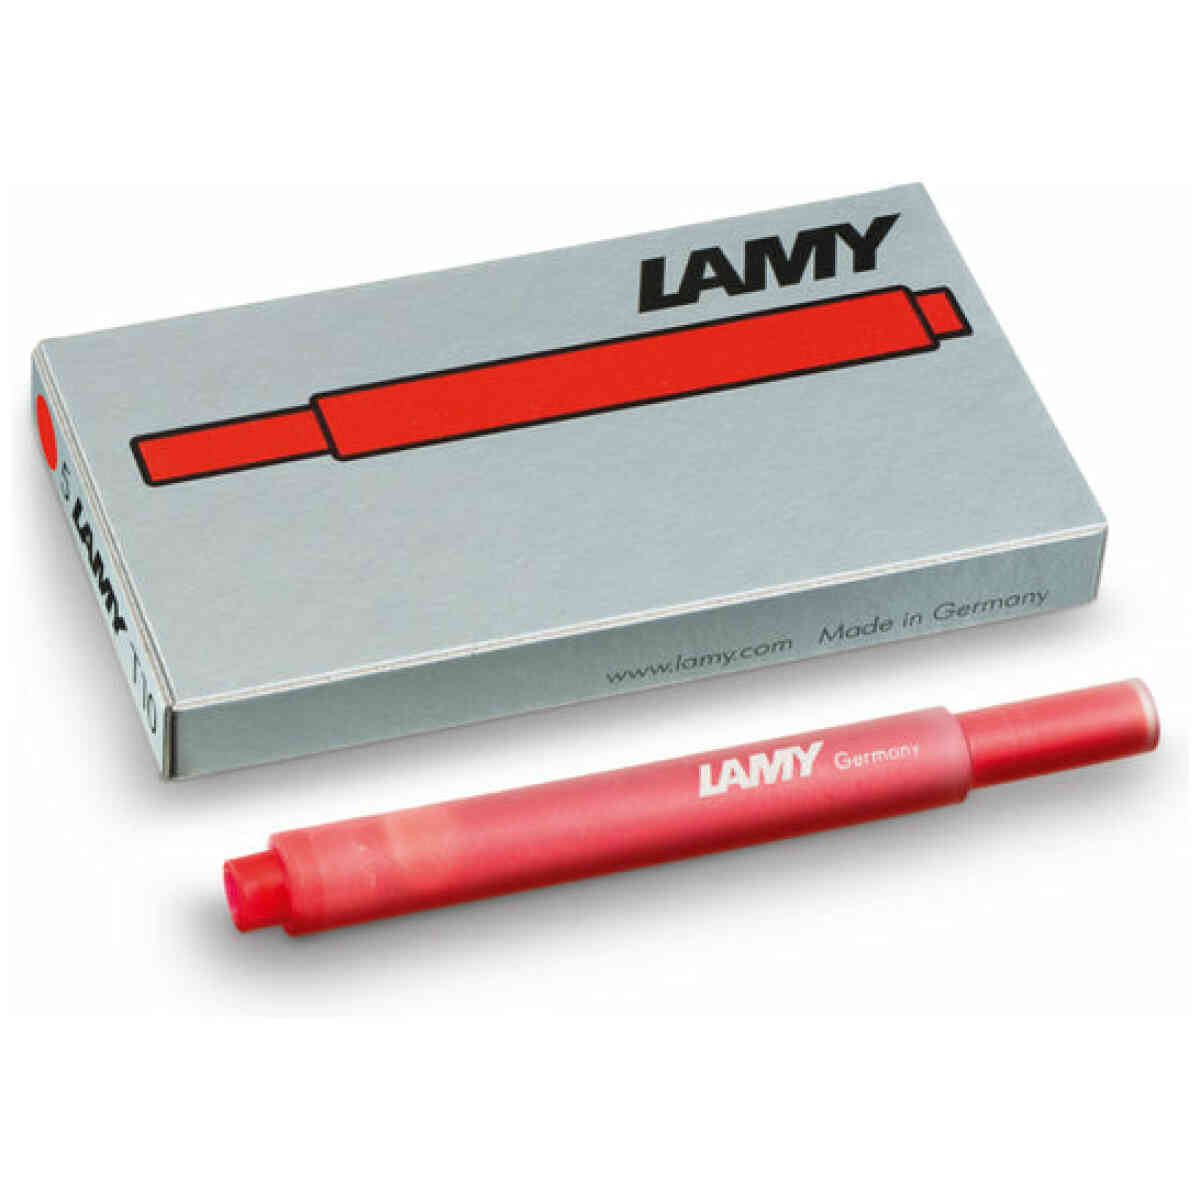 Lamy T10 Ink cardrige red